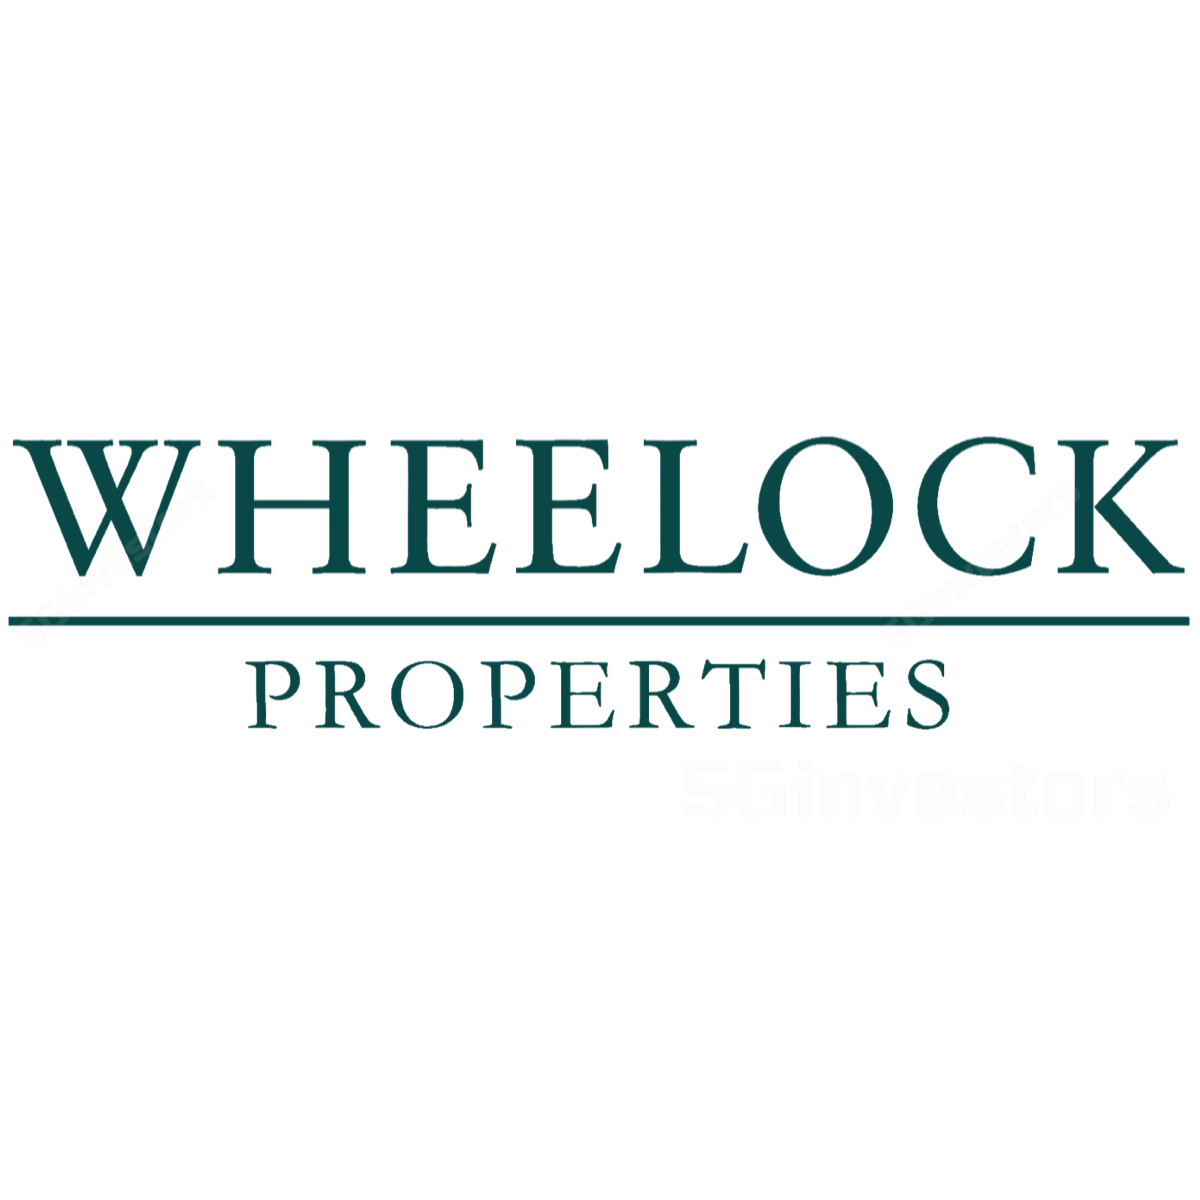 Wheelock Properties Singapore - RHB Invest 2016-12-01: Cash pile could top SGD 1bn in the next few quarters